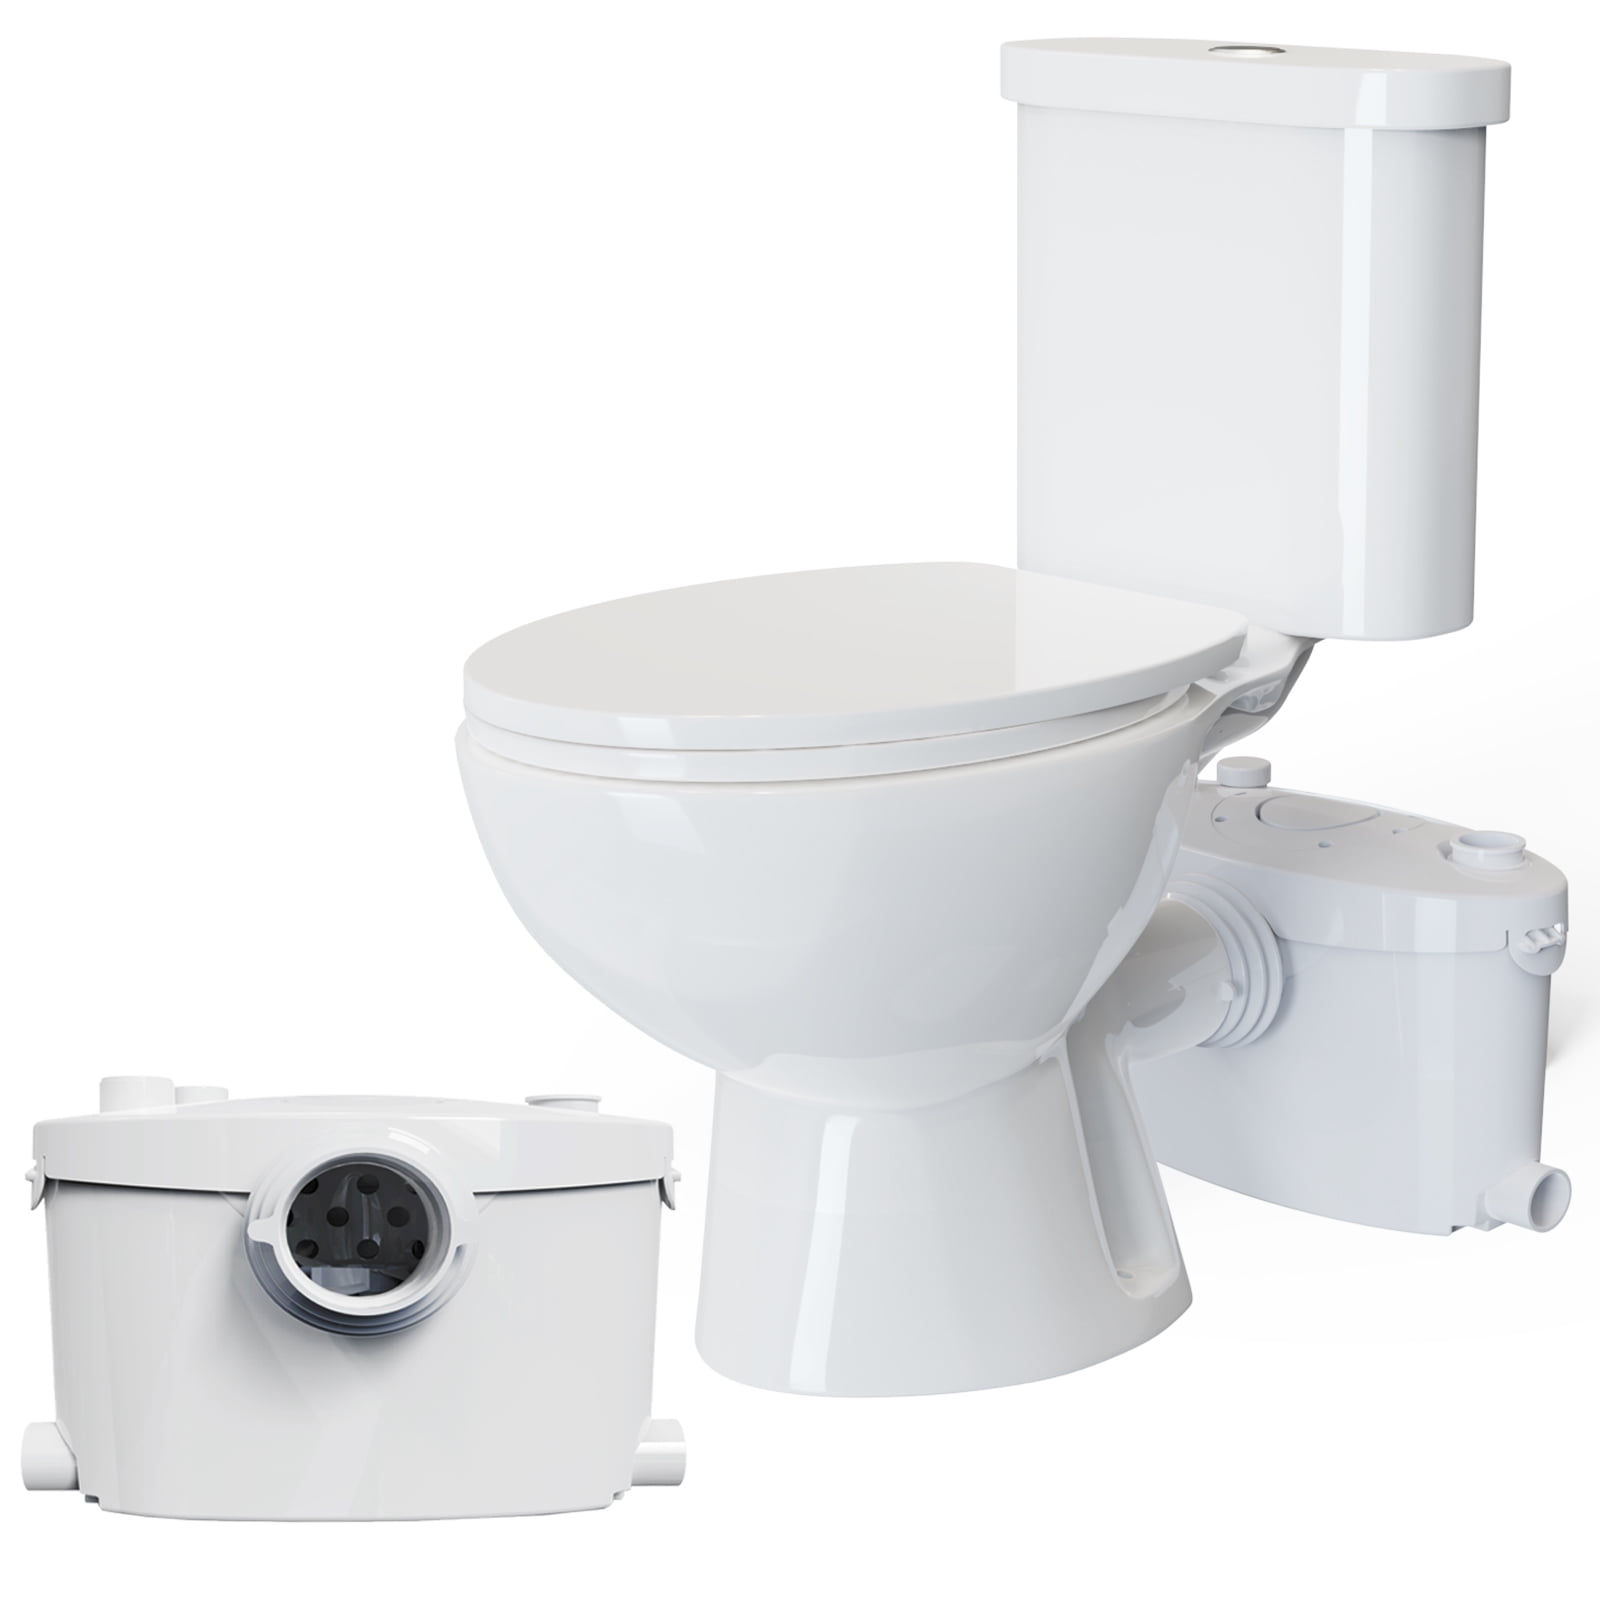 Macerating Toilet With 600w Macerator Pump (Two-Piece Toilets